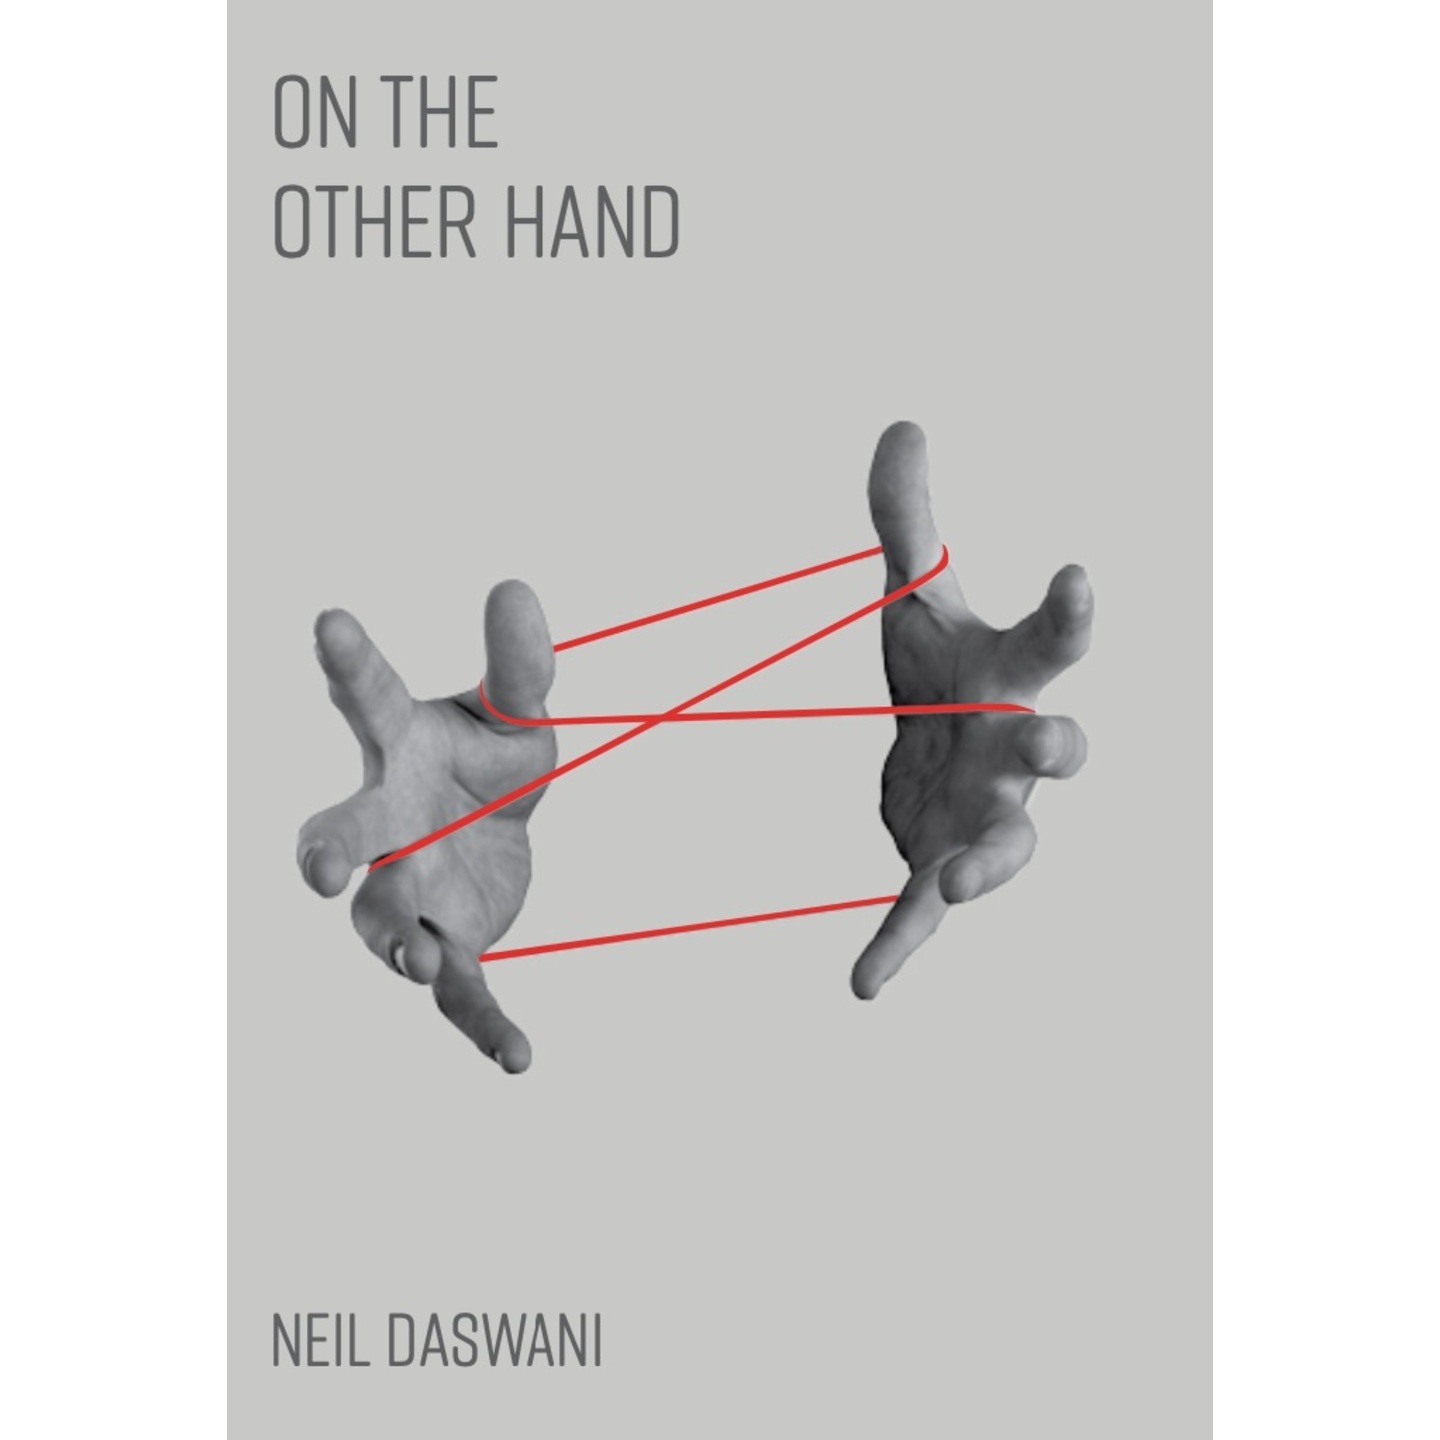 On the Other Hand by Neil Daswani